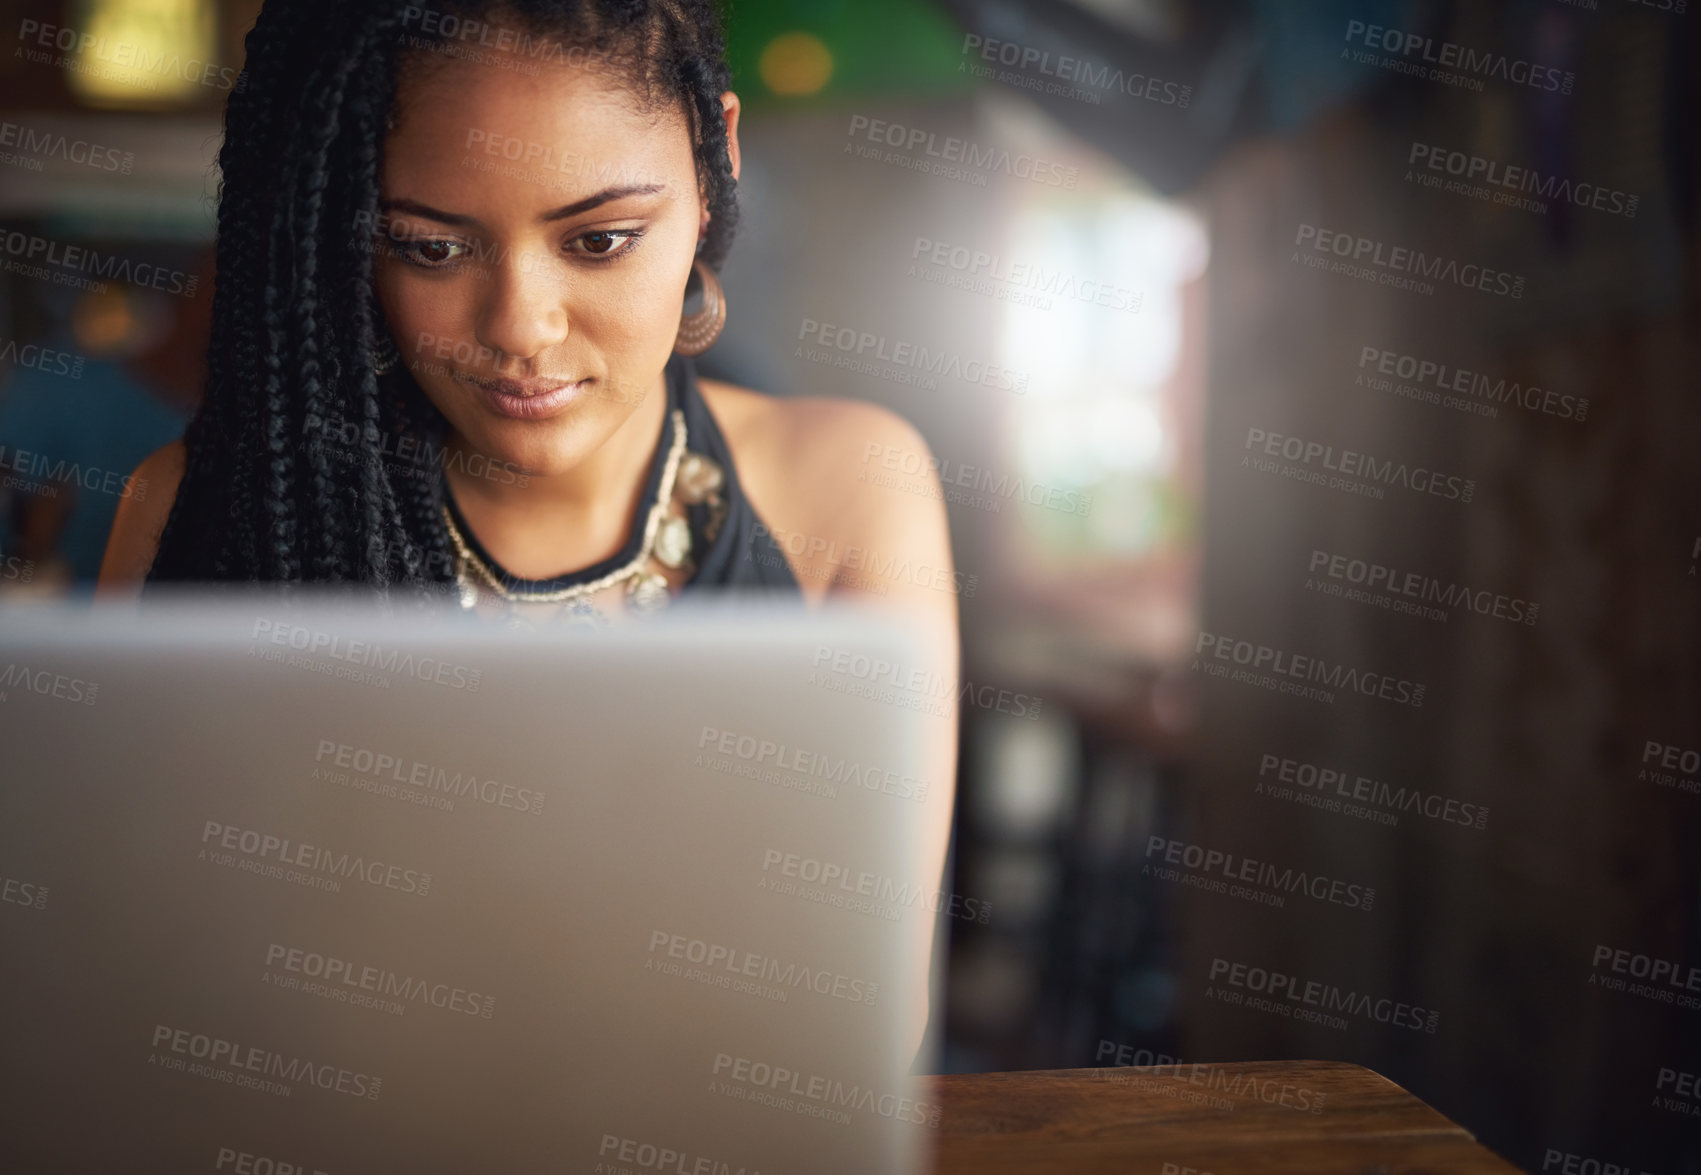 Buy stock photo Cropped shot of an attractive young woman using her laptop in a coffee shop